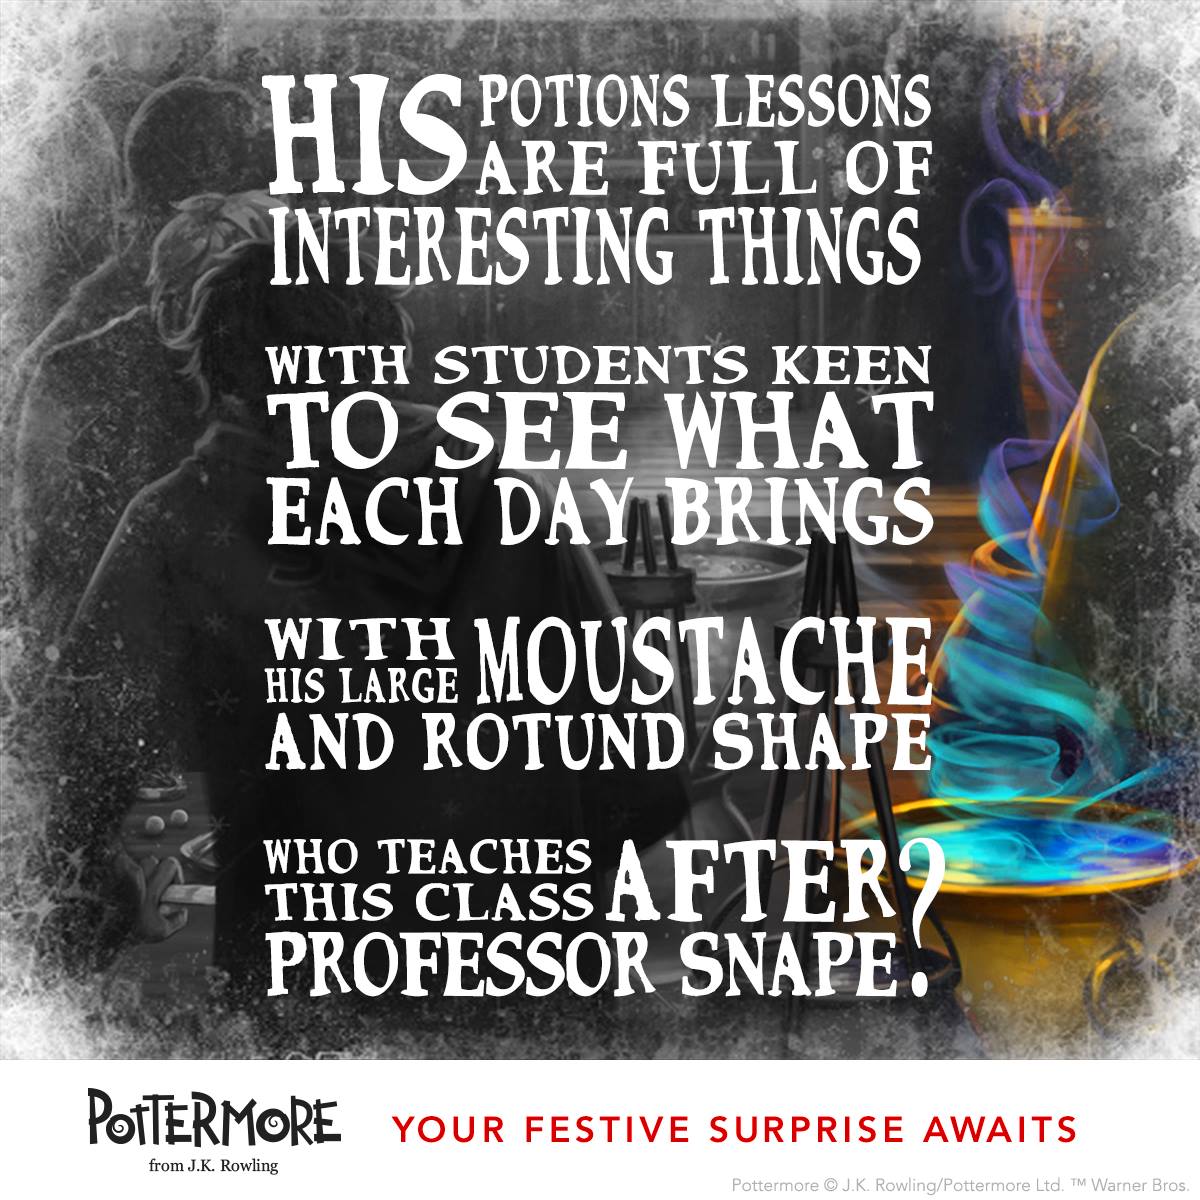 Day 3 of J.K. Rowling’s Twelve Days of Christmas Harry Potter Moments